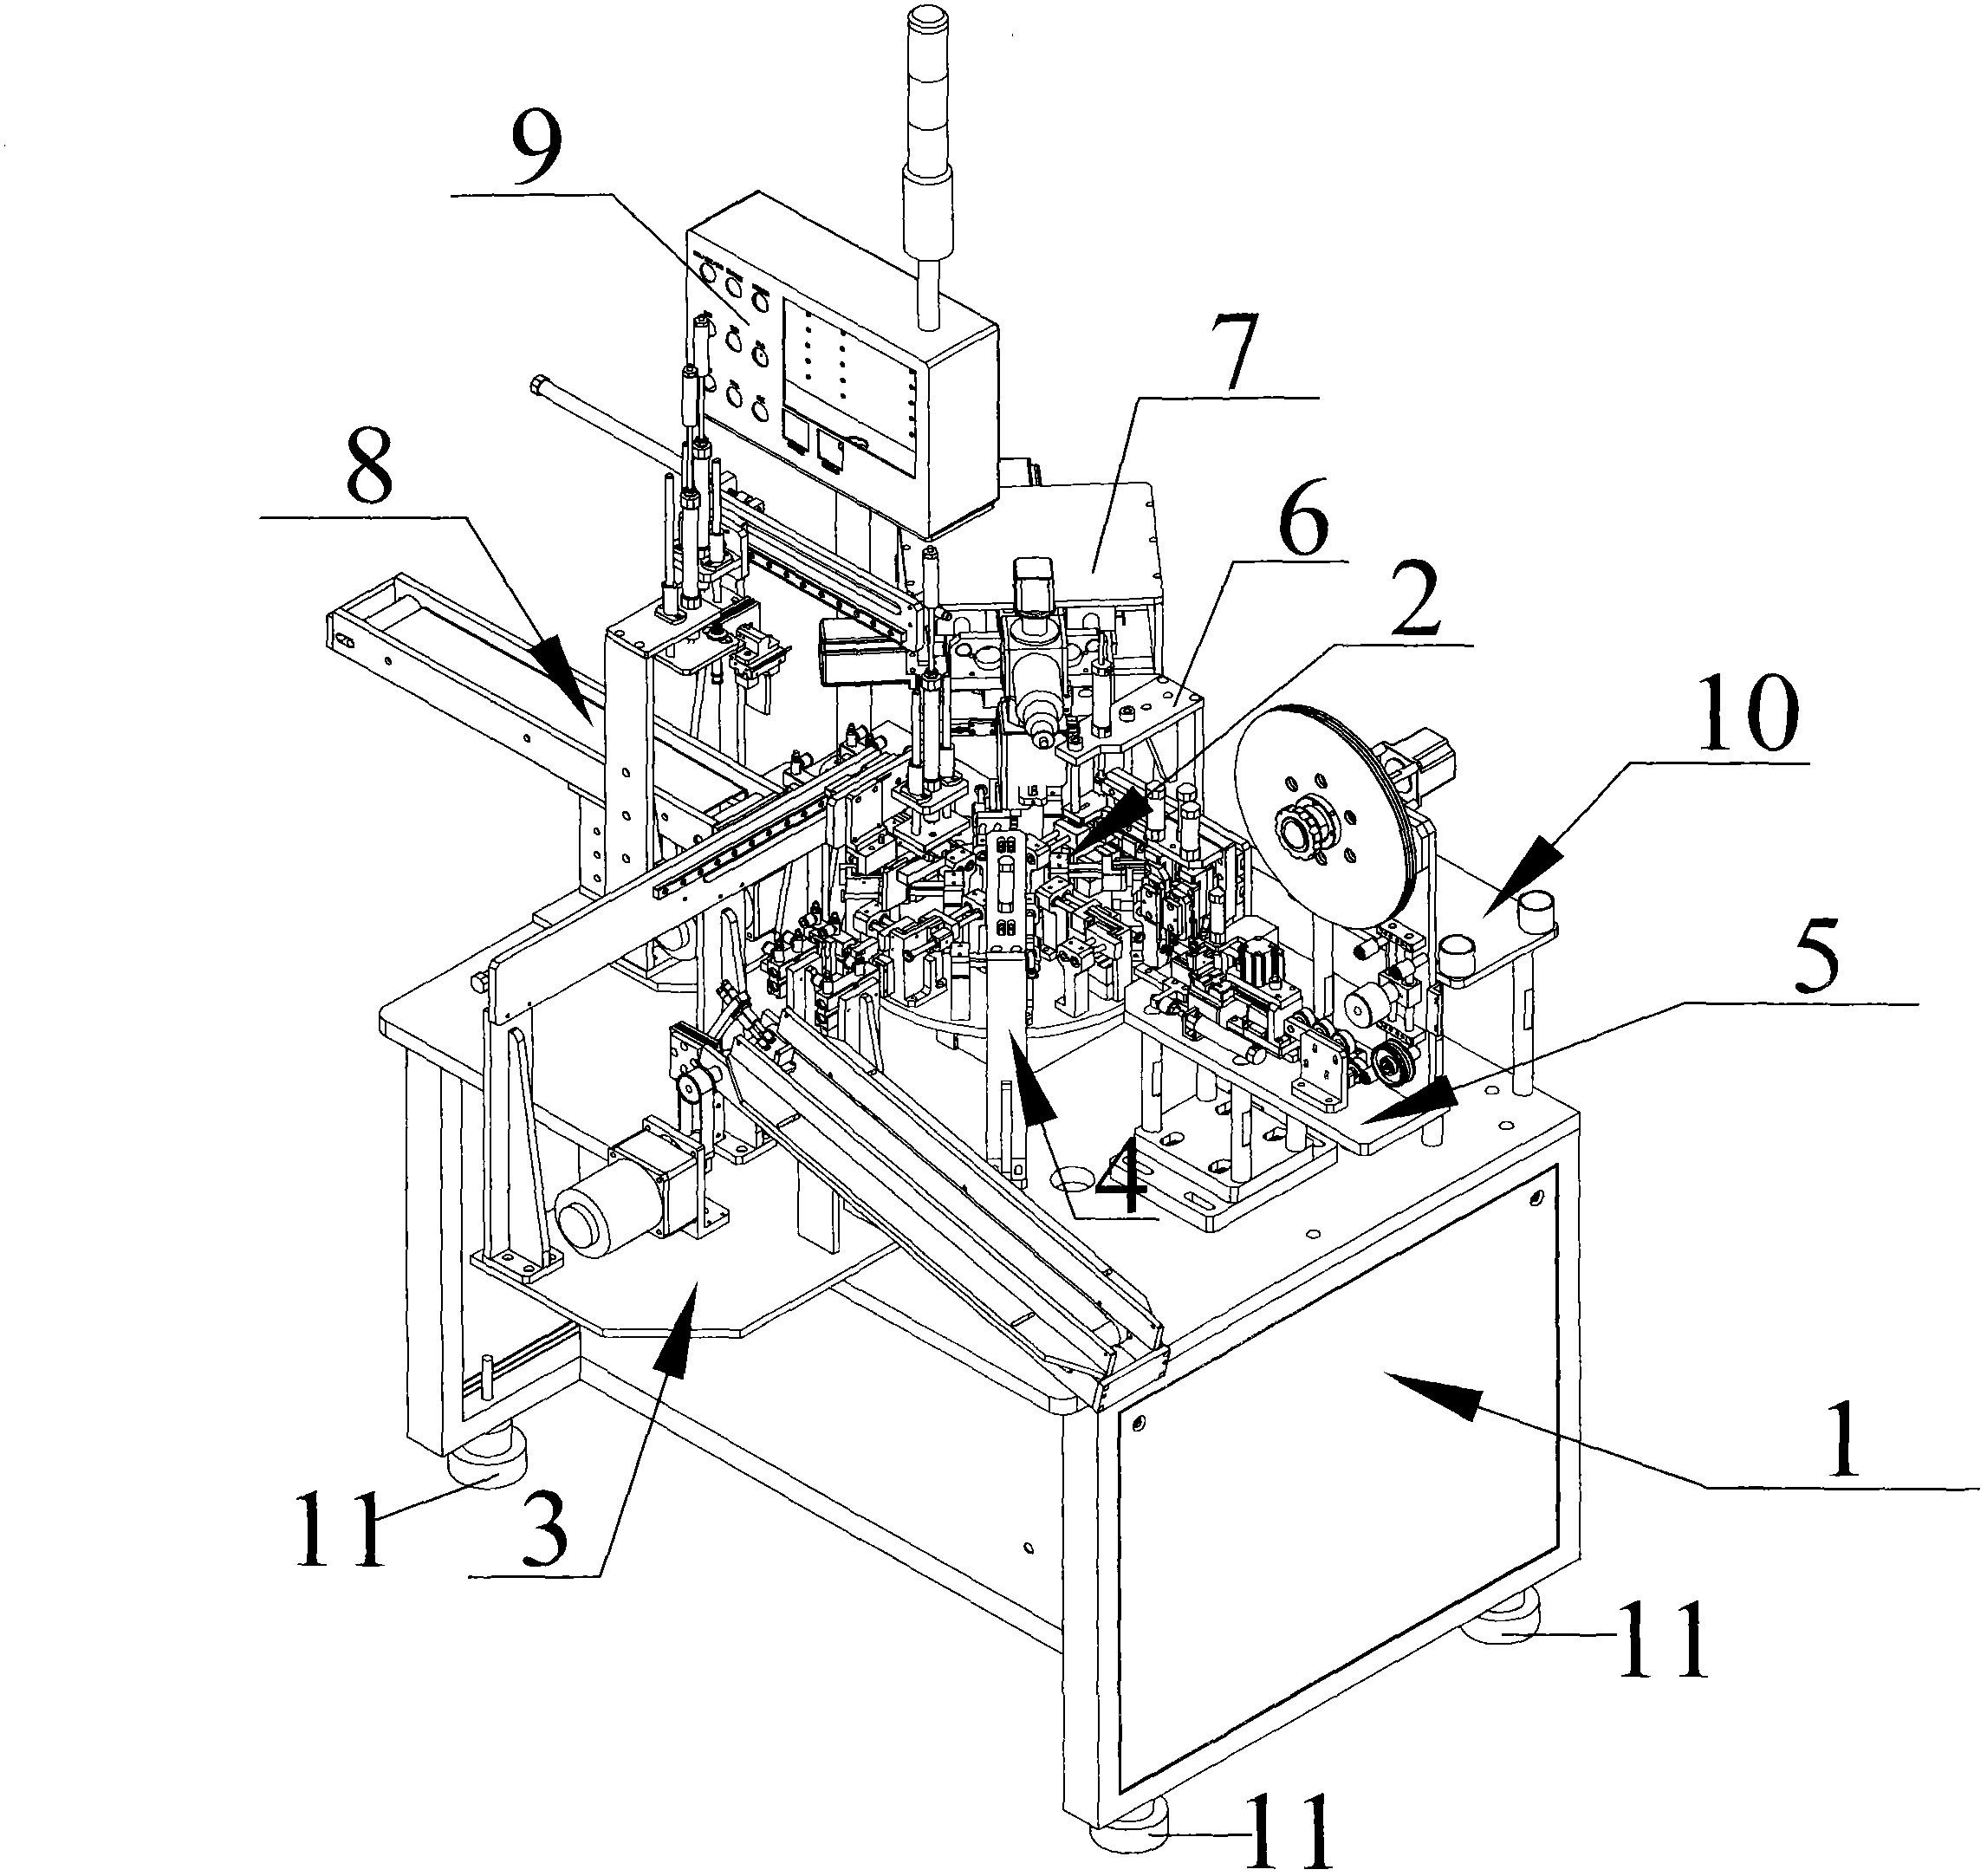 Full-automatic laser welder device and operation method